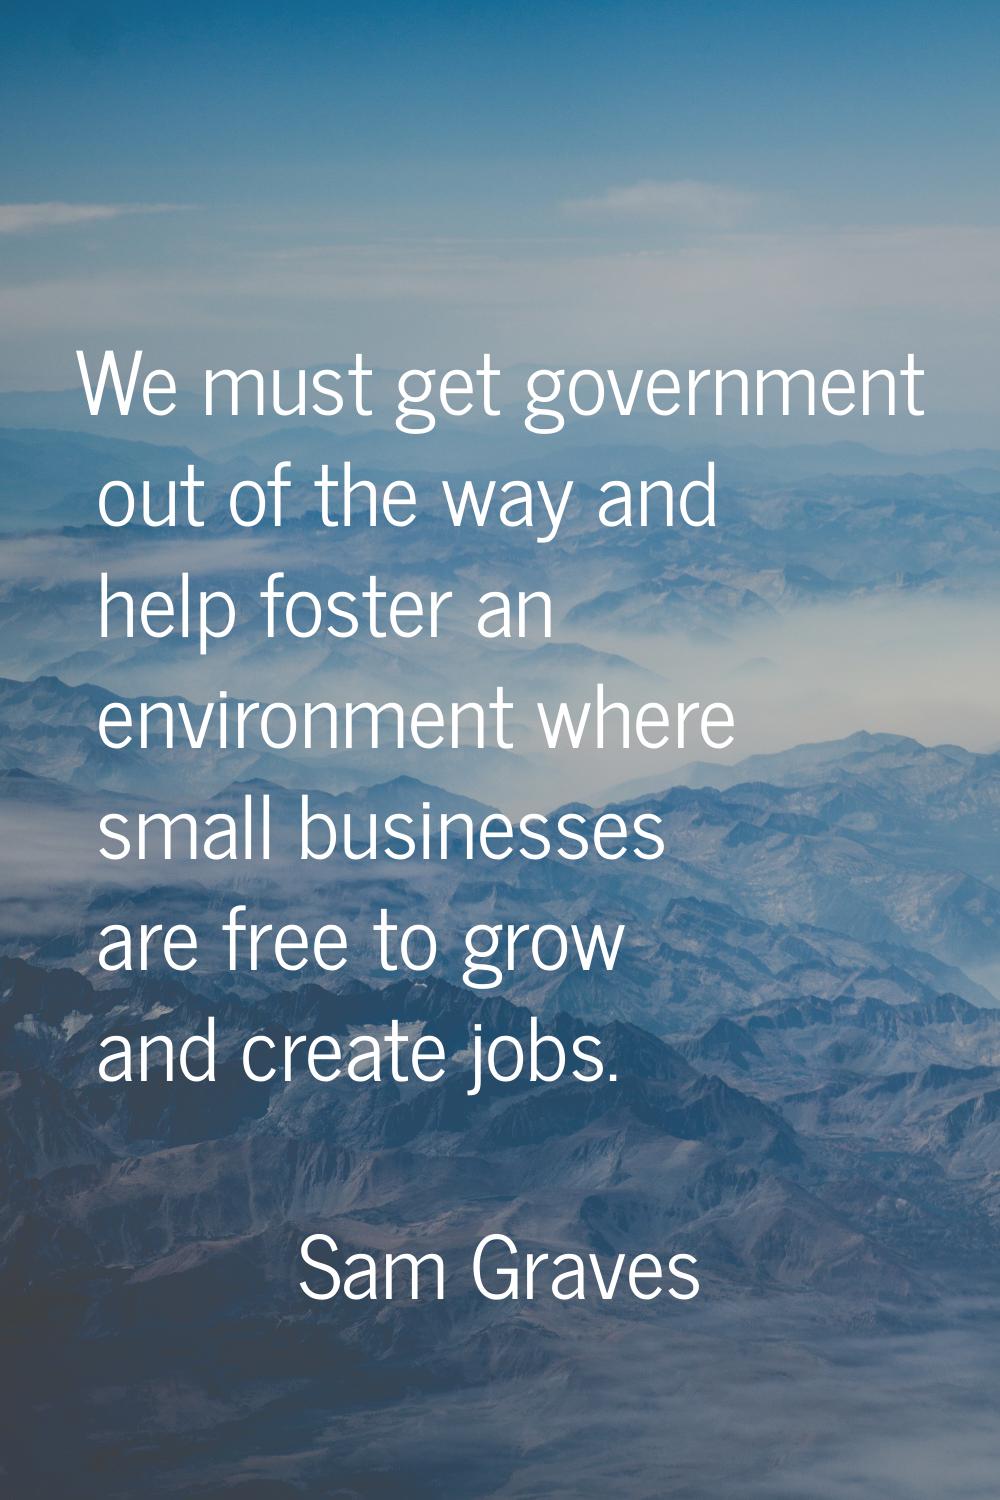 We must get government out of the way and help foster an environment where small businesses are fre